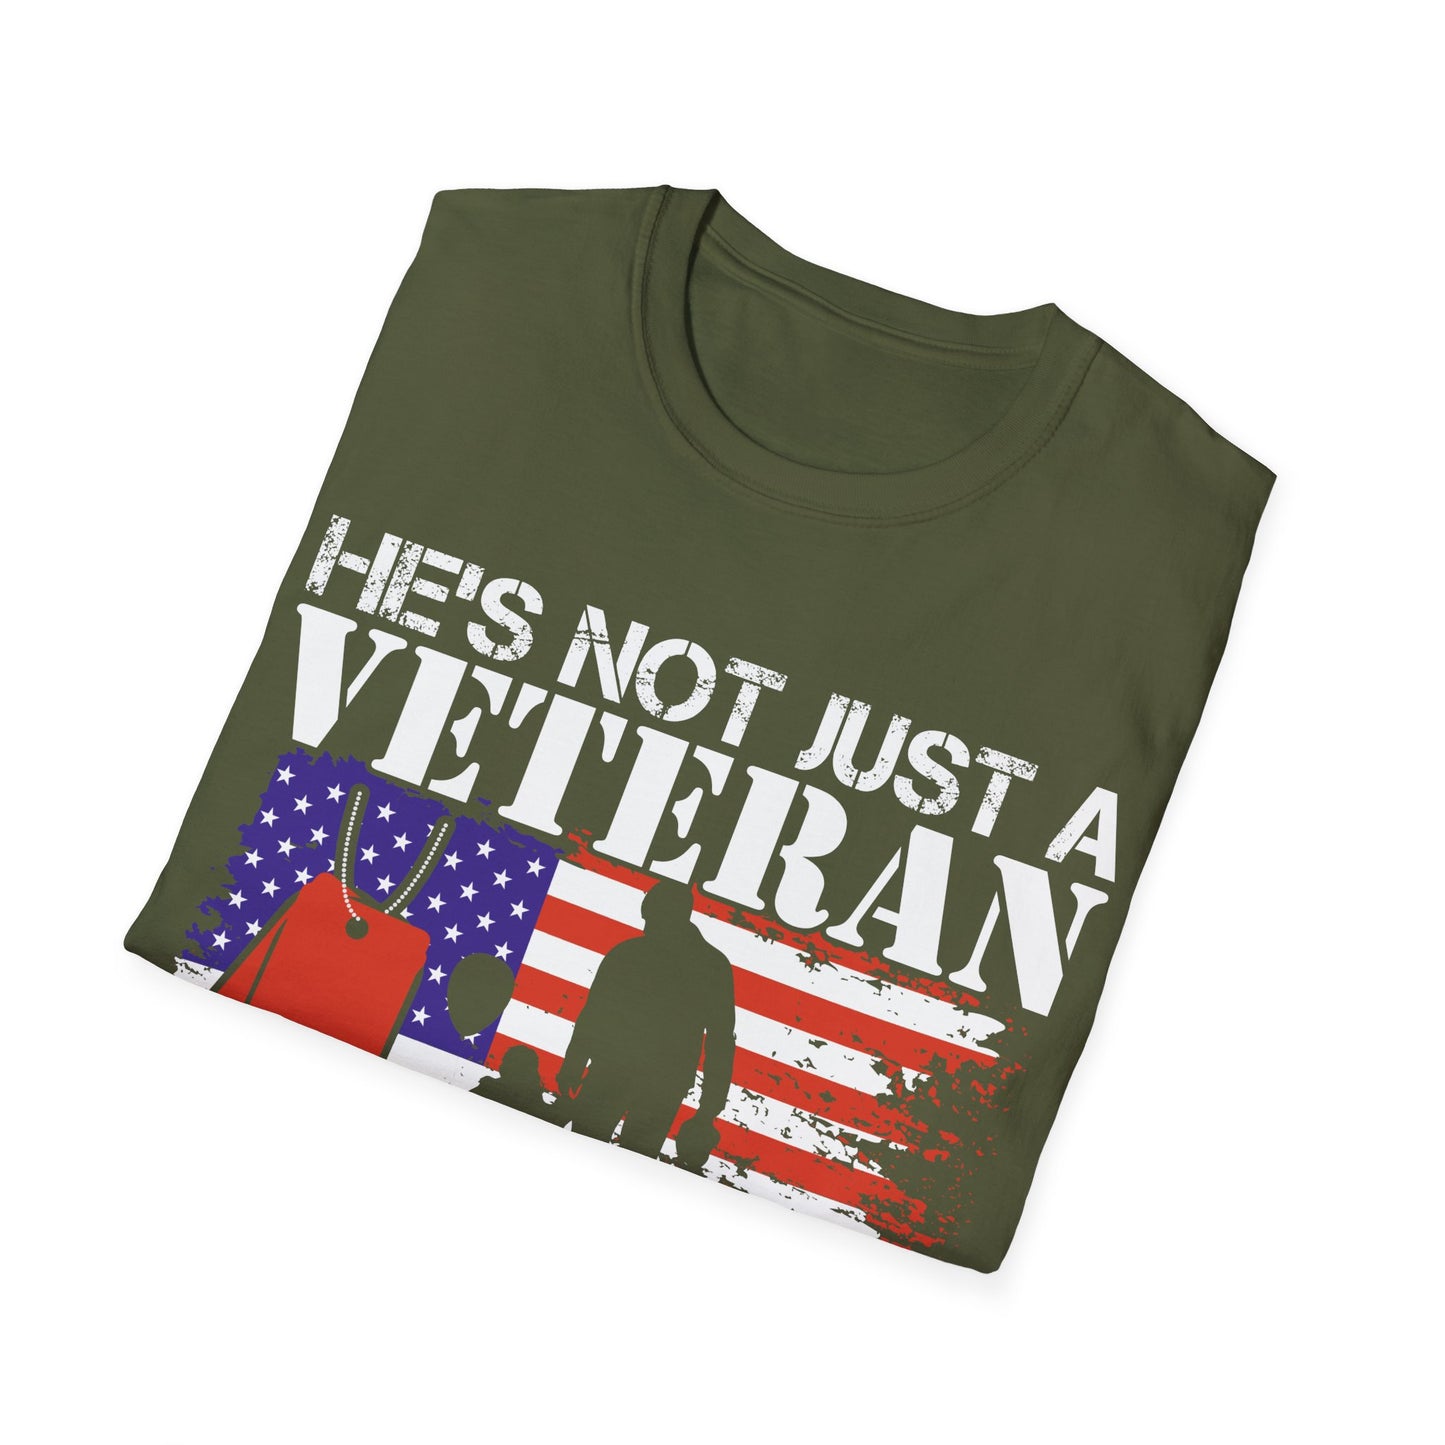 Not Just A Veteran - Dad - Unisex Softstyle T-Shirt